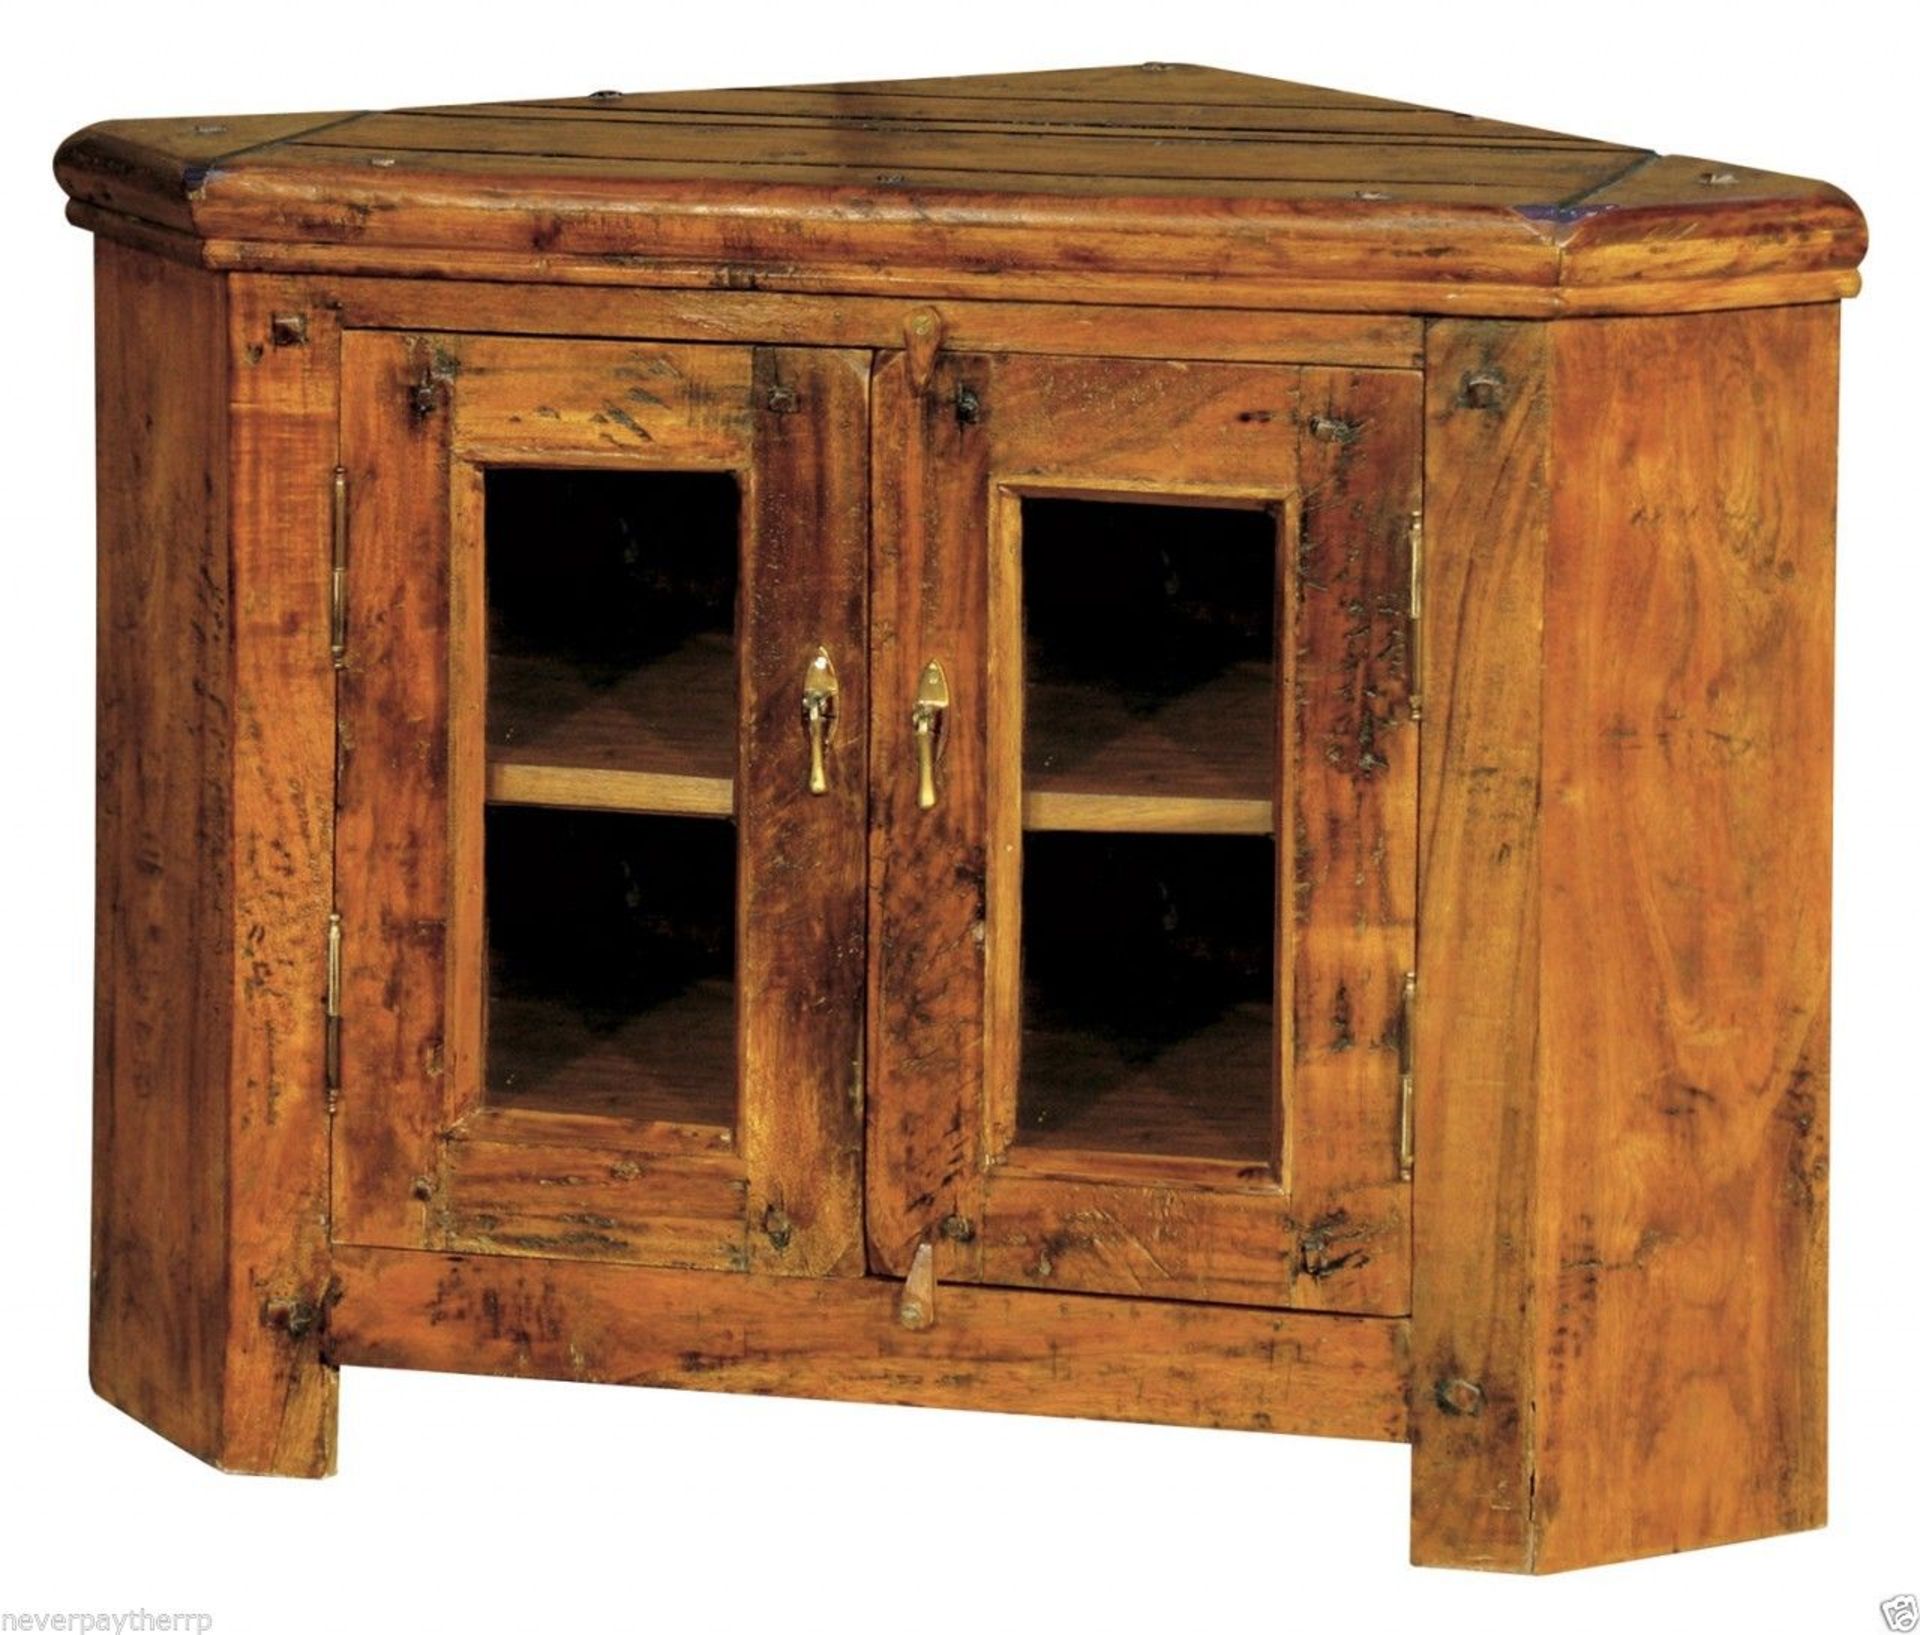 NEW Granary Corner TV Cabinet Entertainment Unit. Solid Acacia Wood Product code AB120 Retails at £